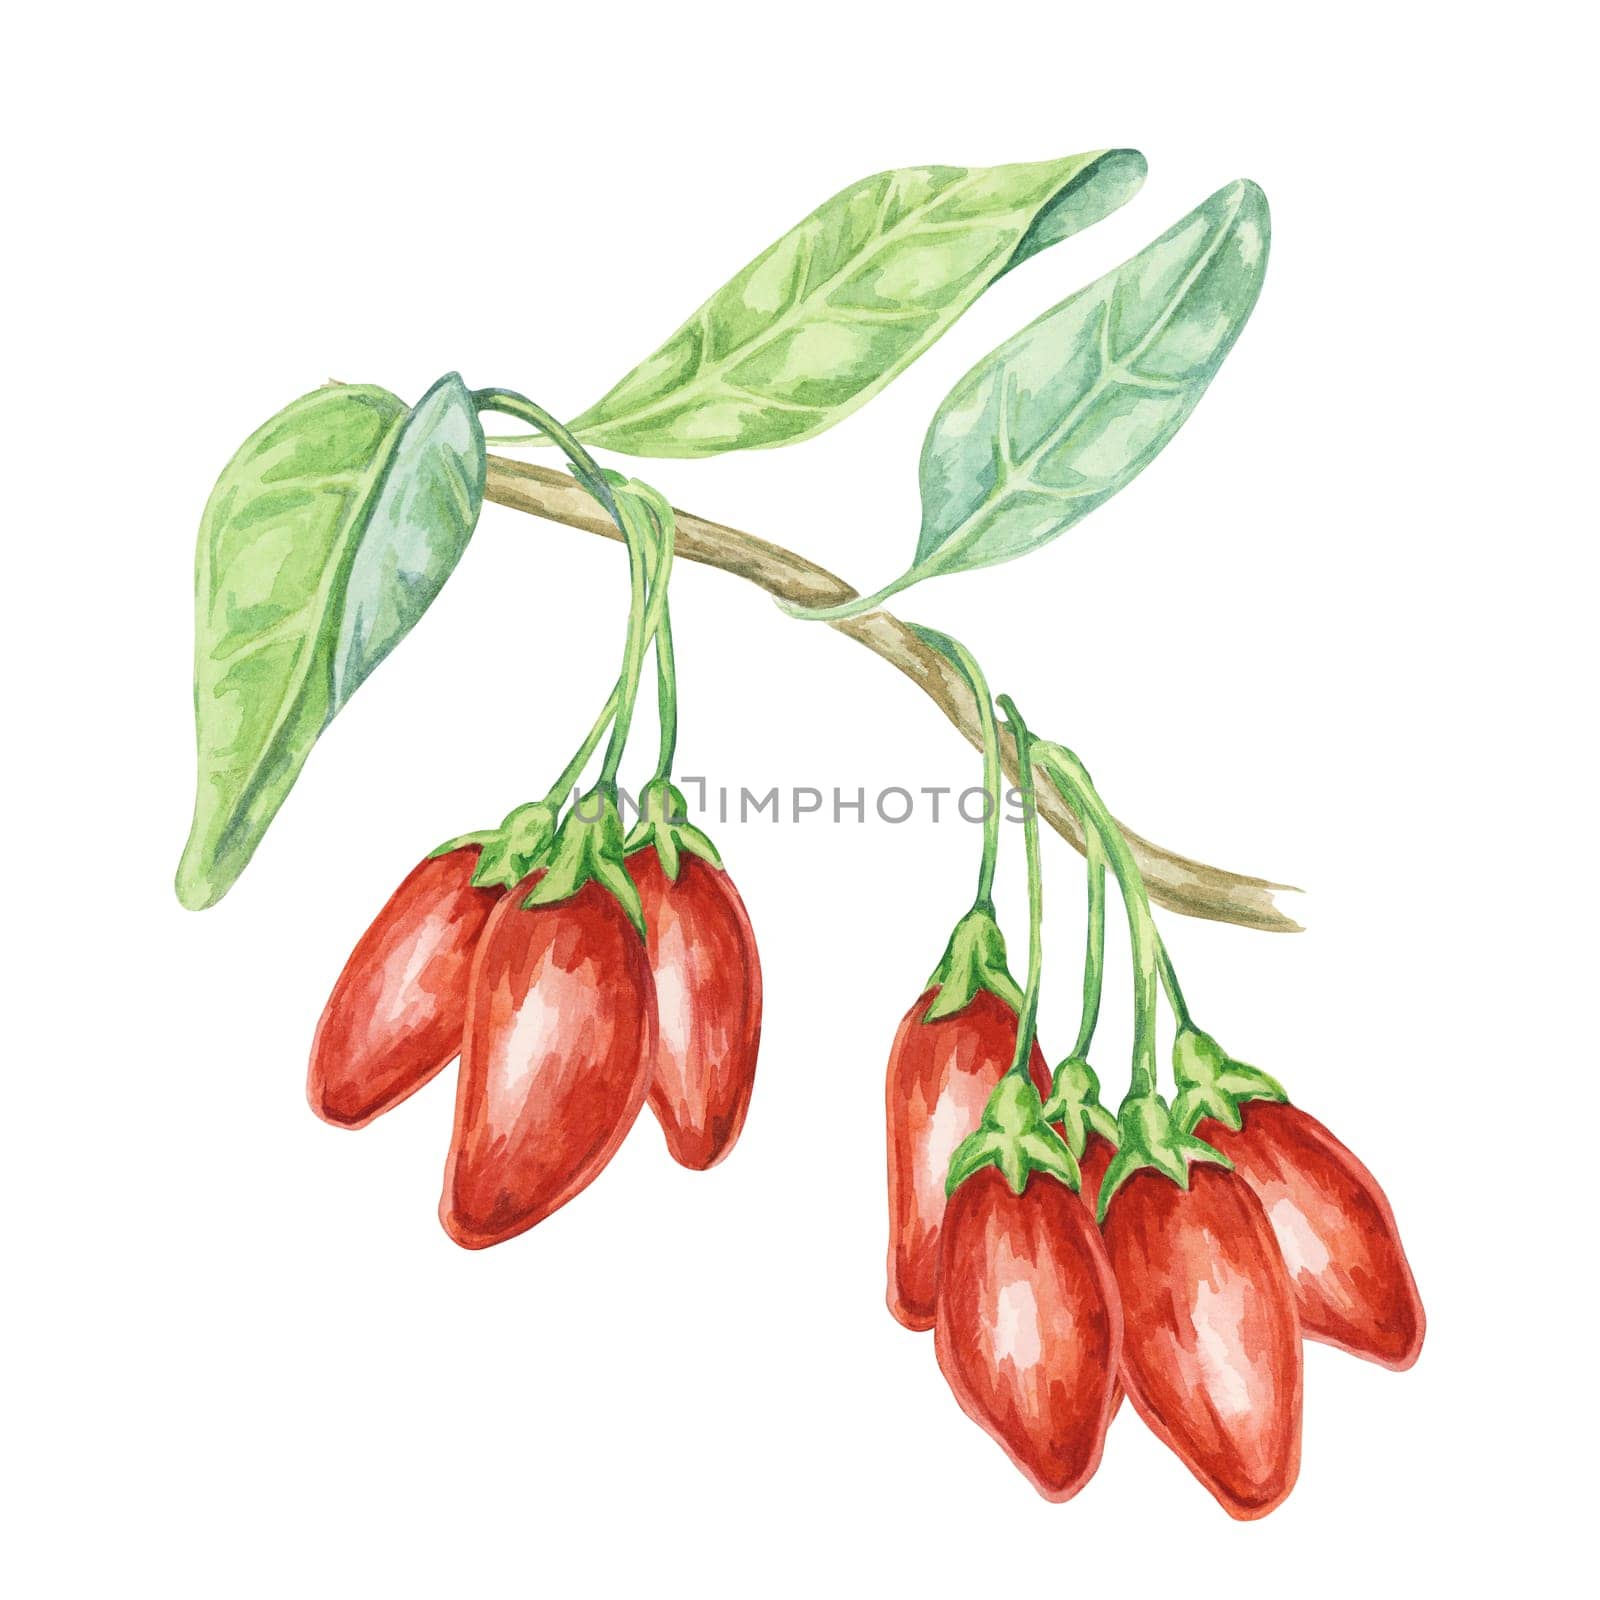 Branch of the goji berry plant in watercolor by Fofito